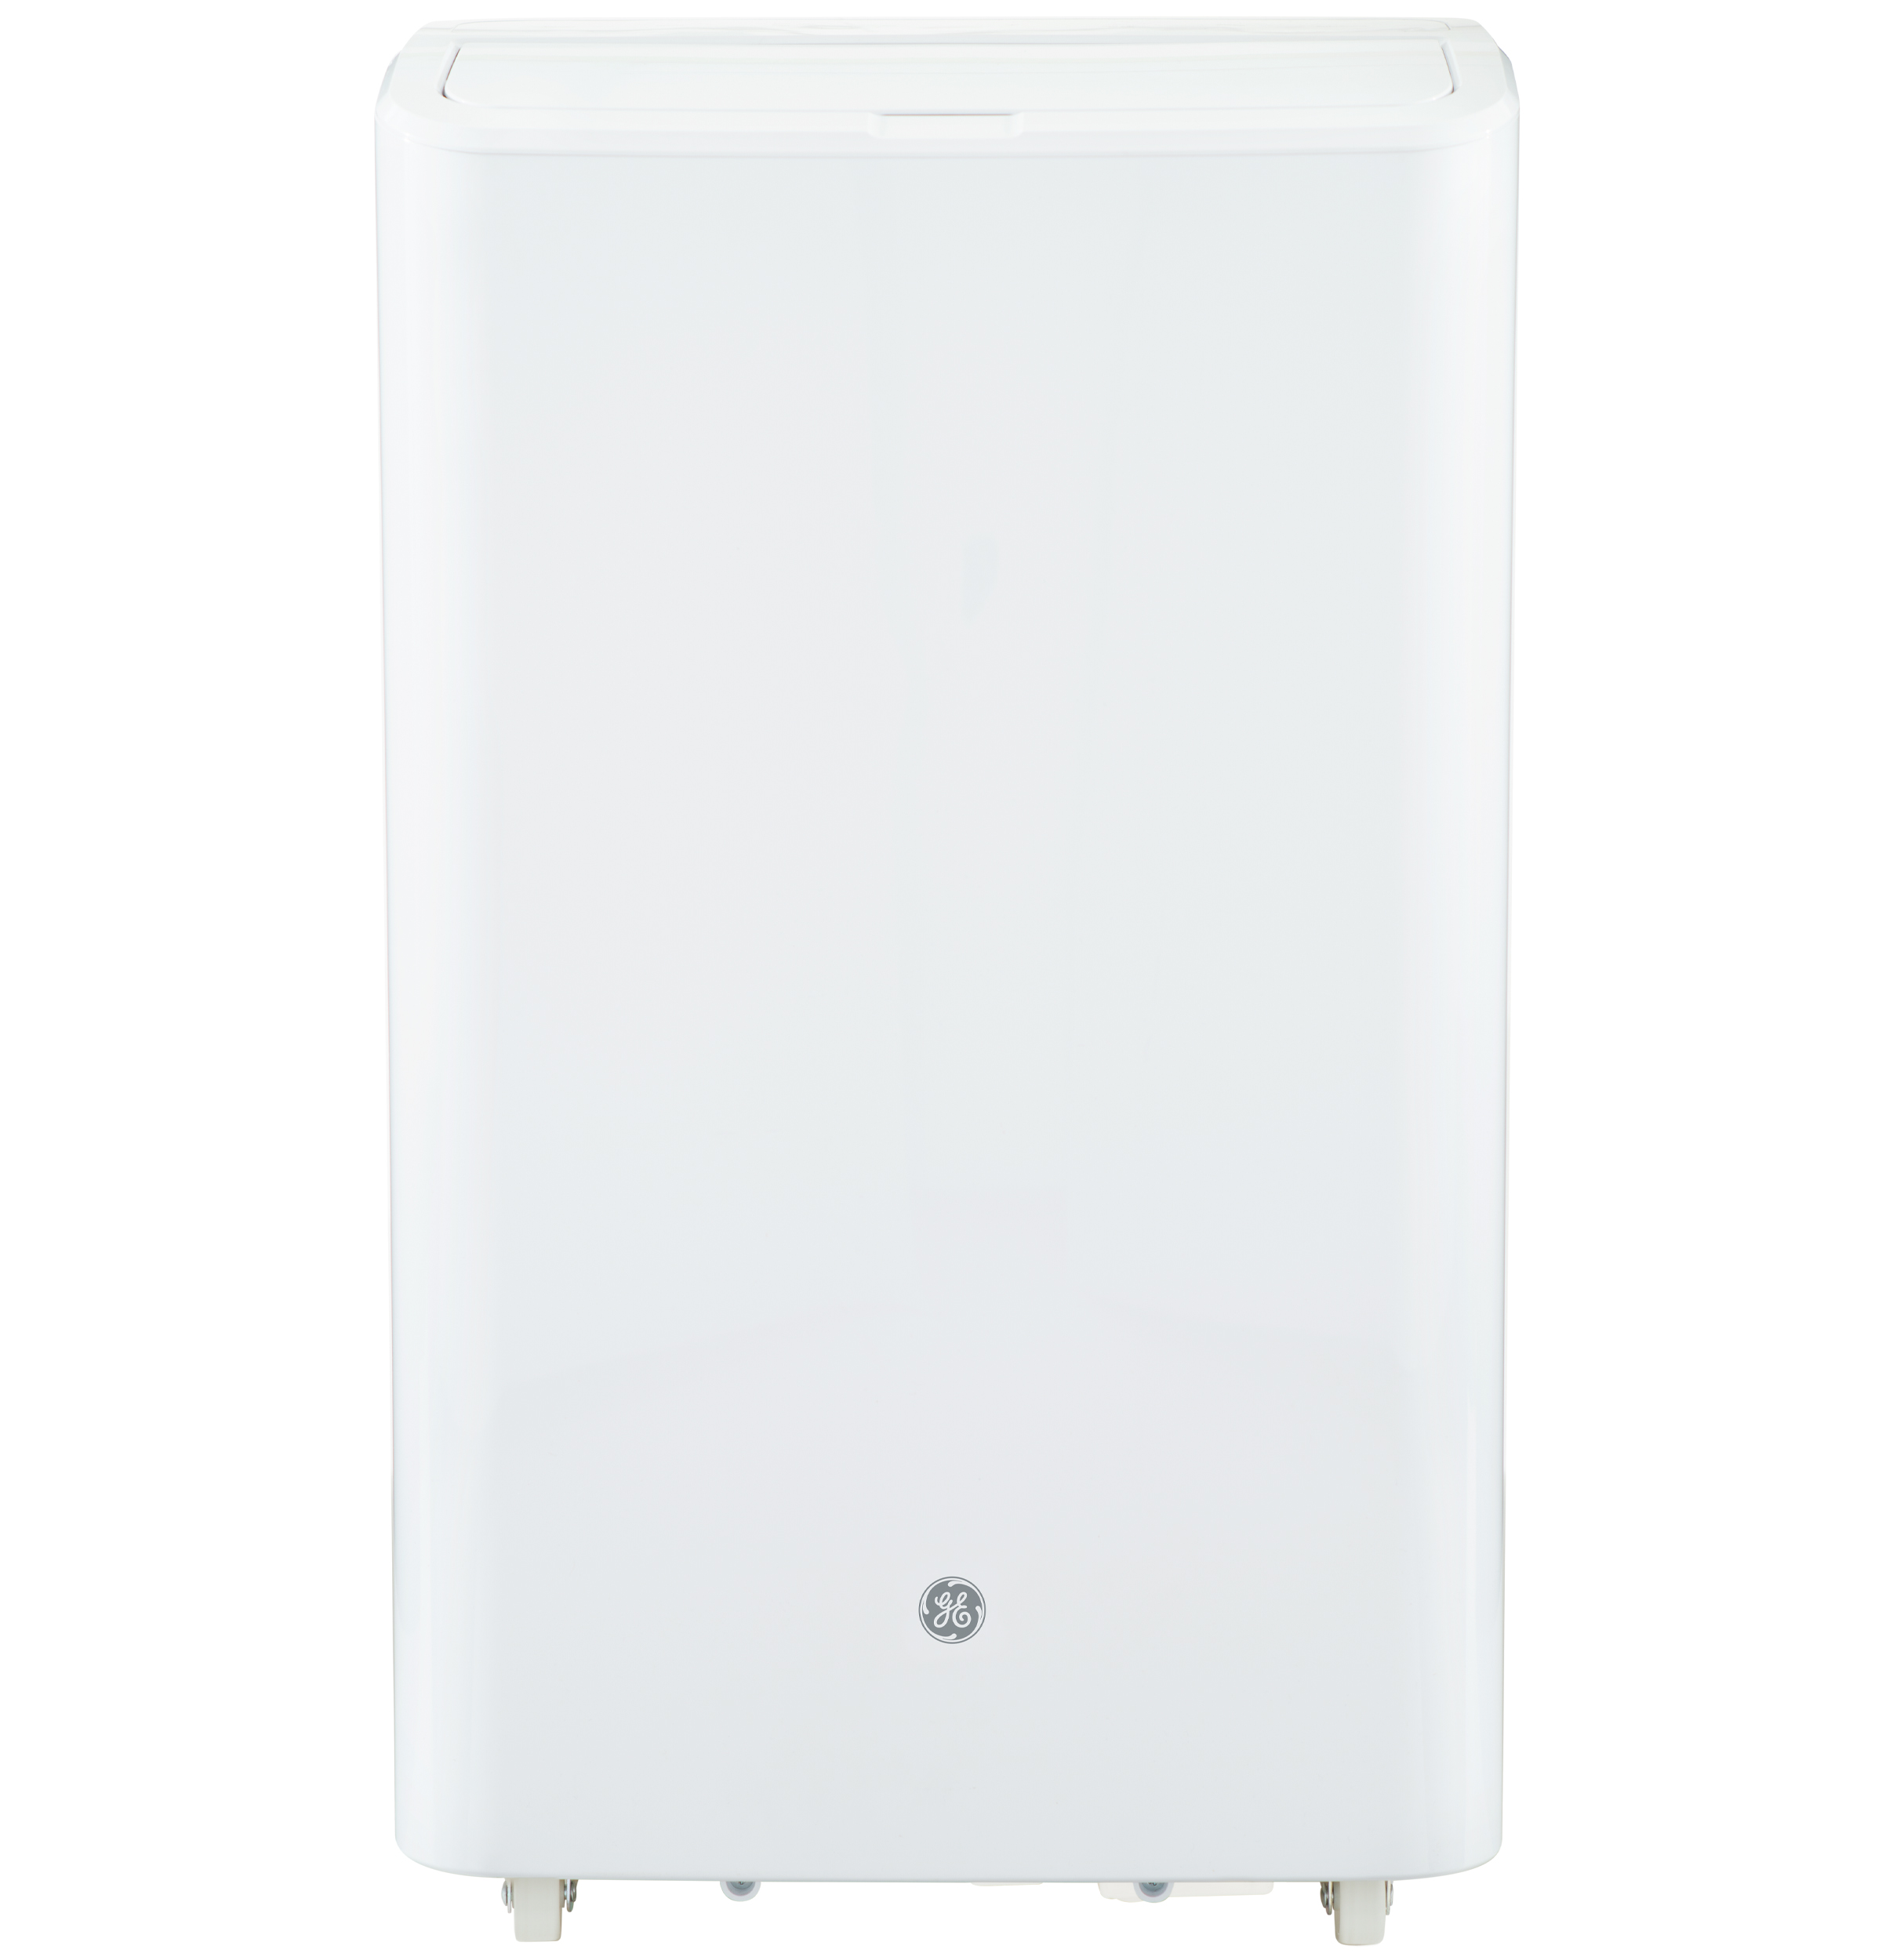 GE® 8,000 BTU Portable Air Conditioner for Medium Rooms up to 350 sq ft.